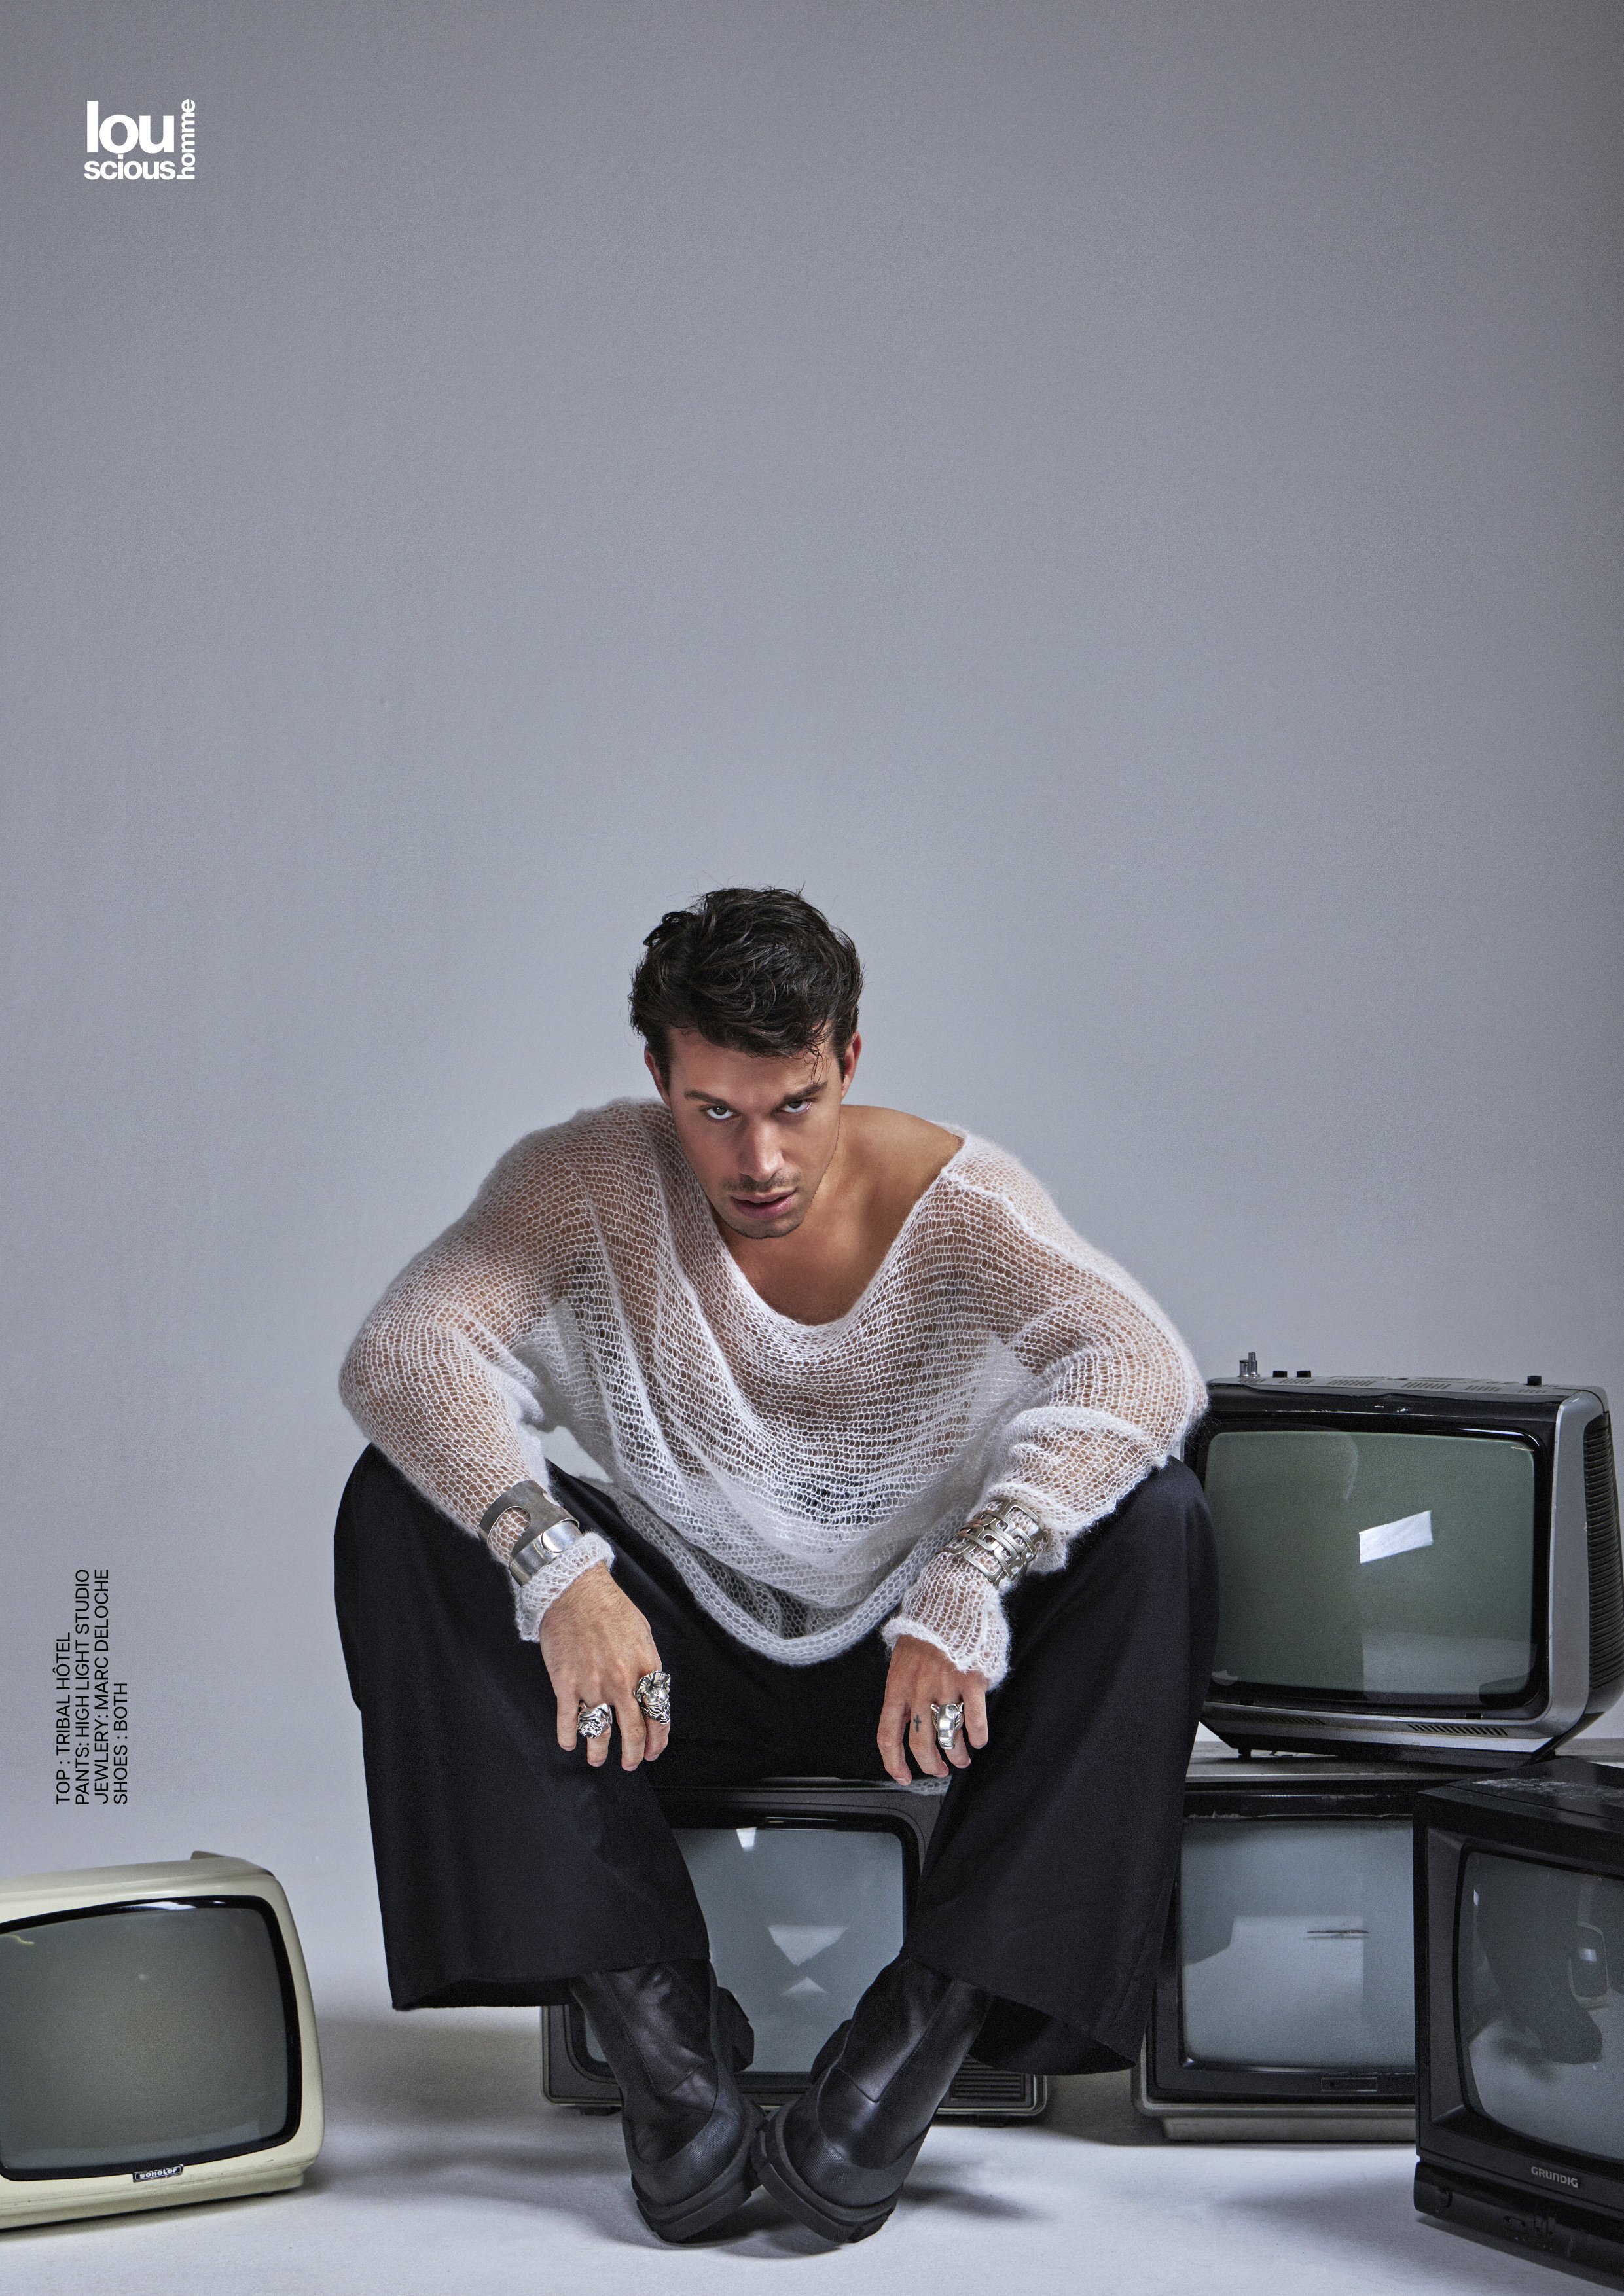 Louscious Homme Online Editorial - Editorial Andrew Matarazzo by Issa Tall_12.jpg